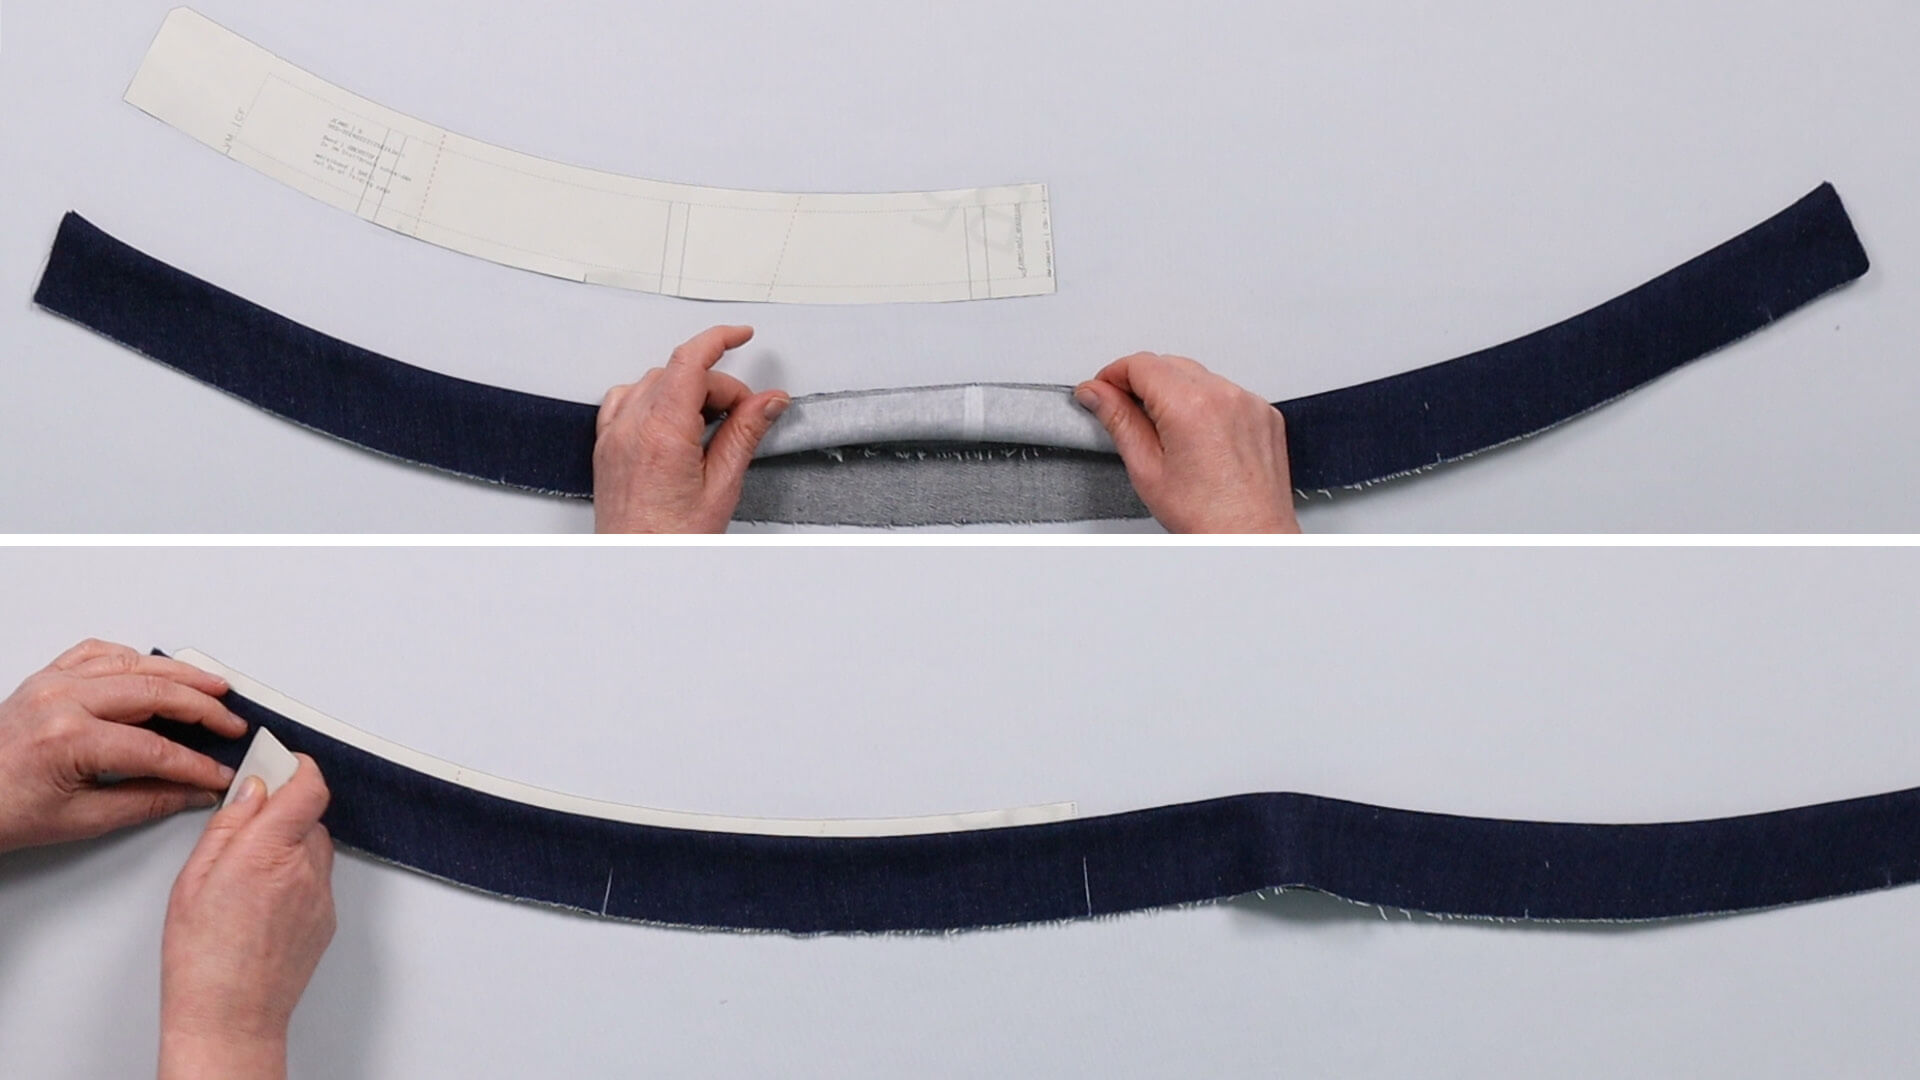 The picture shows how the markings are transferred to the waistband.